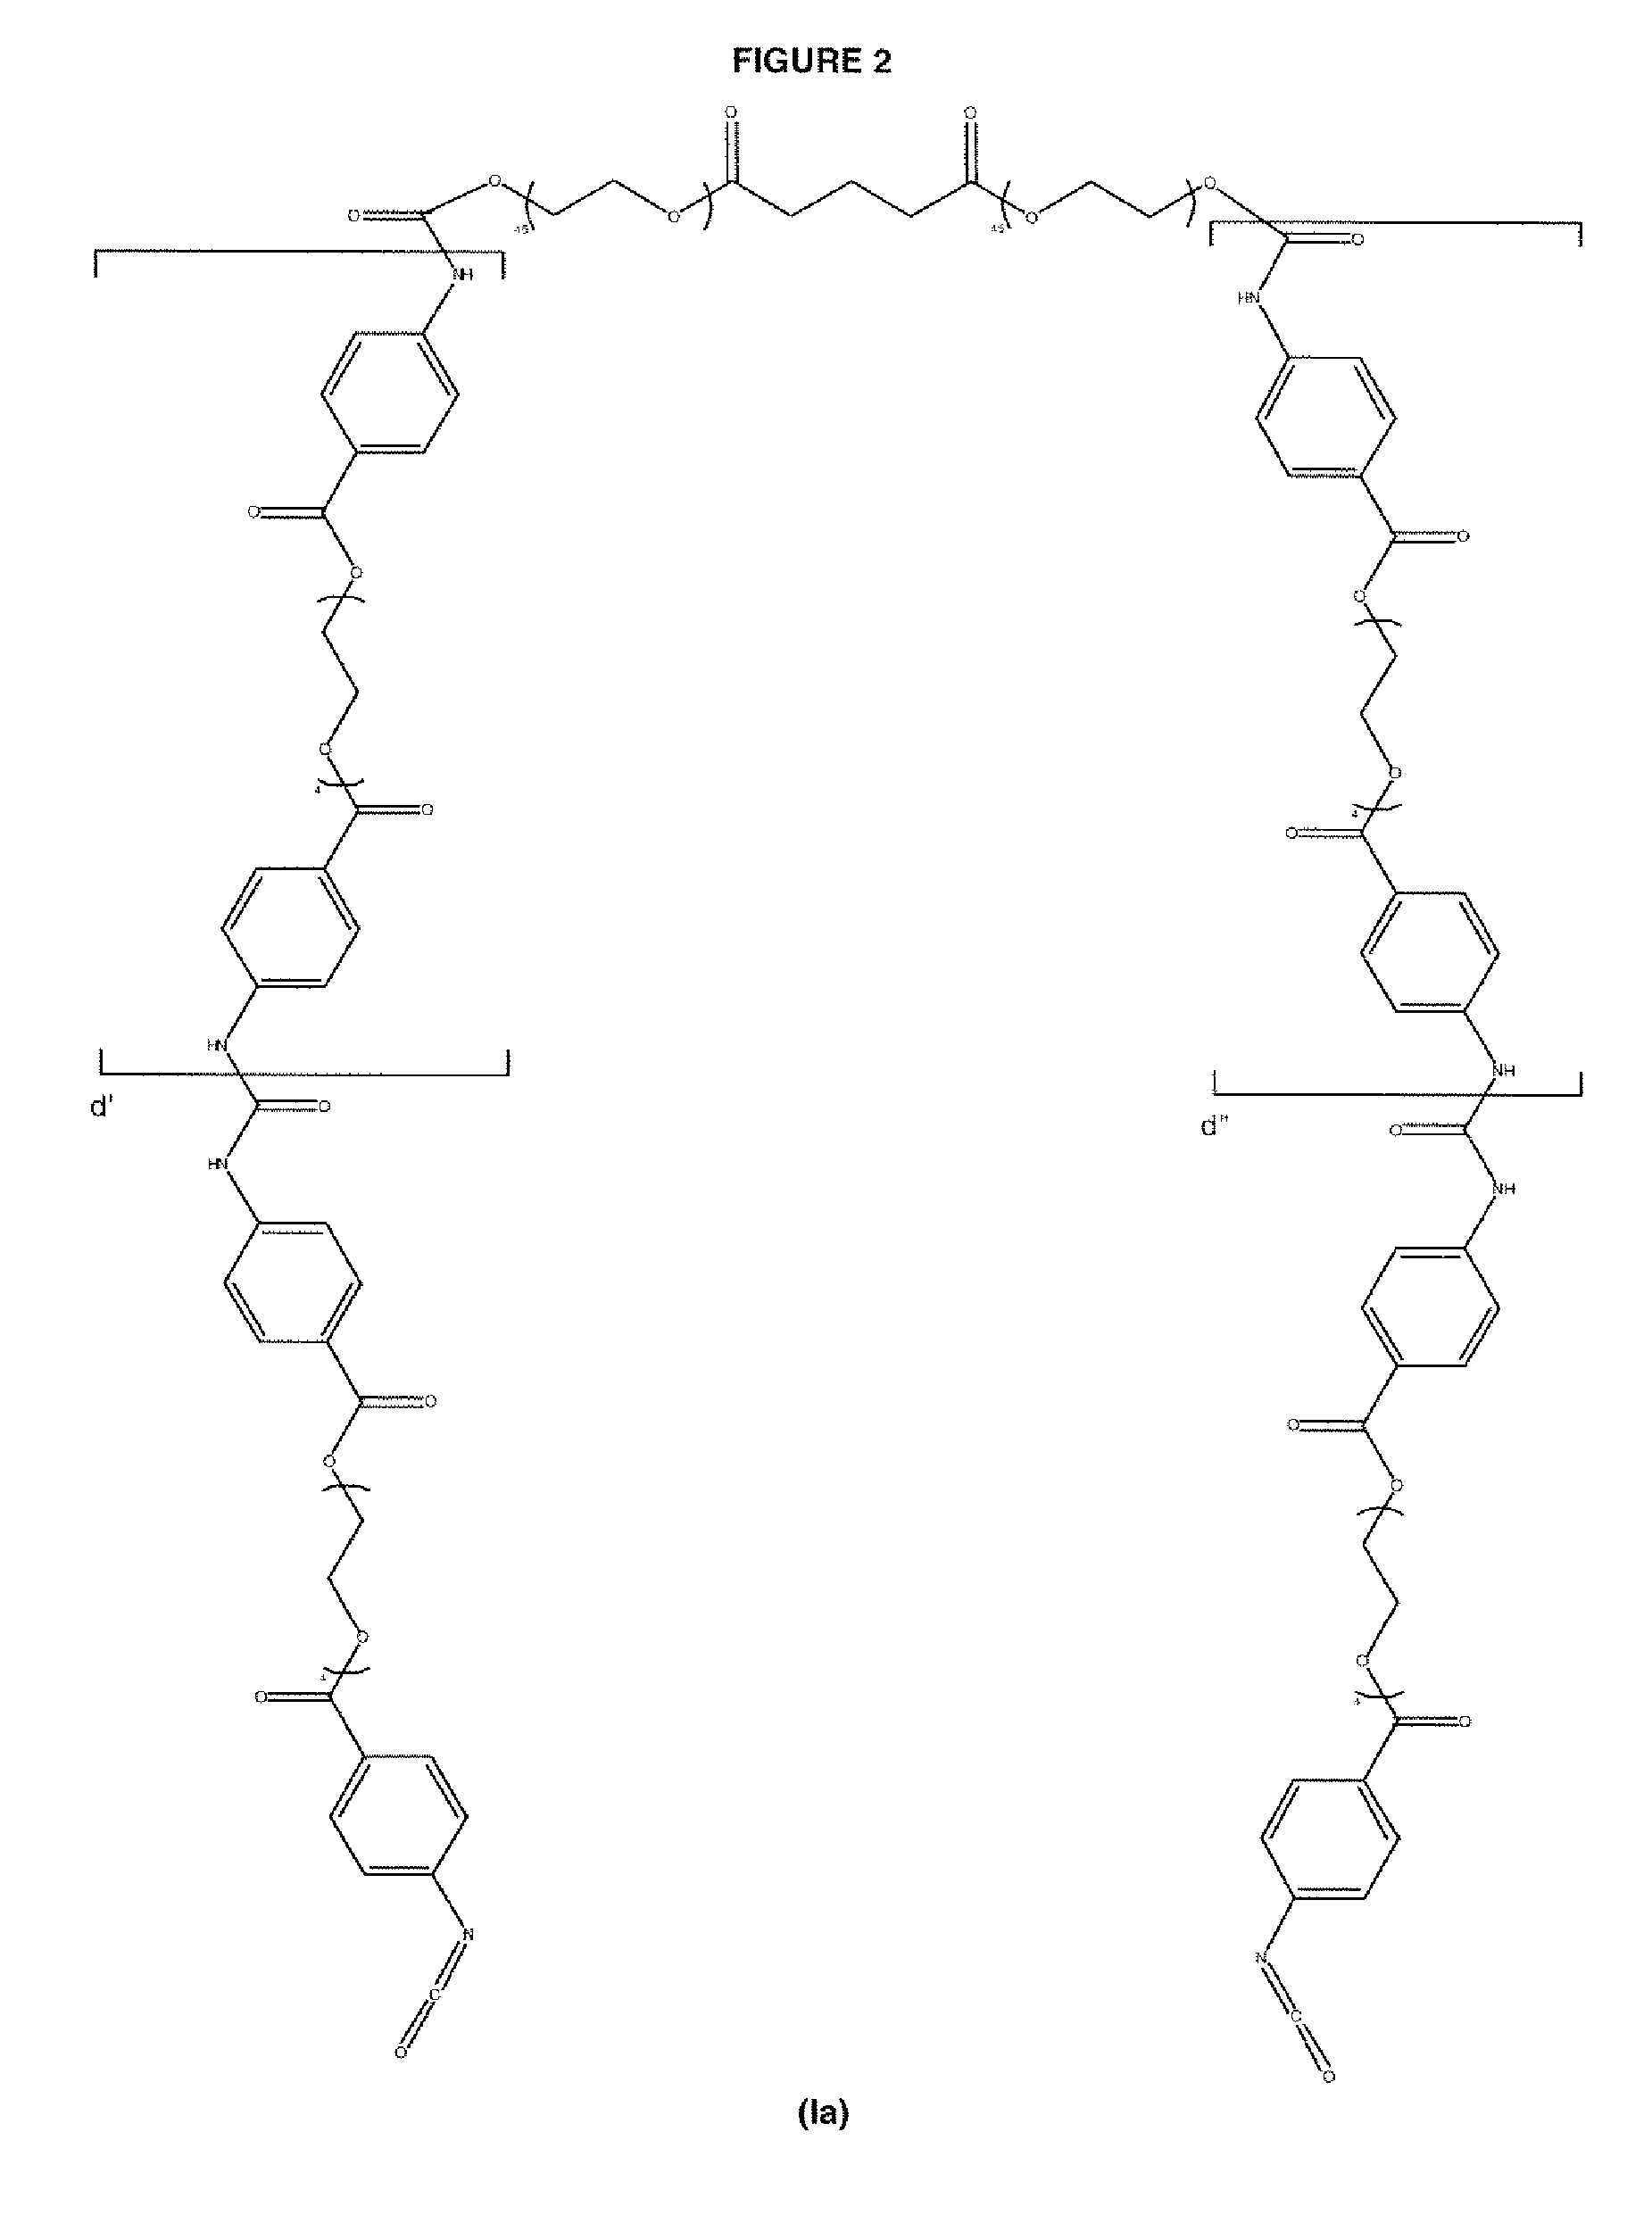 Diisocyanate terminated macromer and formulation thereof for use as an internal adhesive or sealant